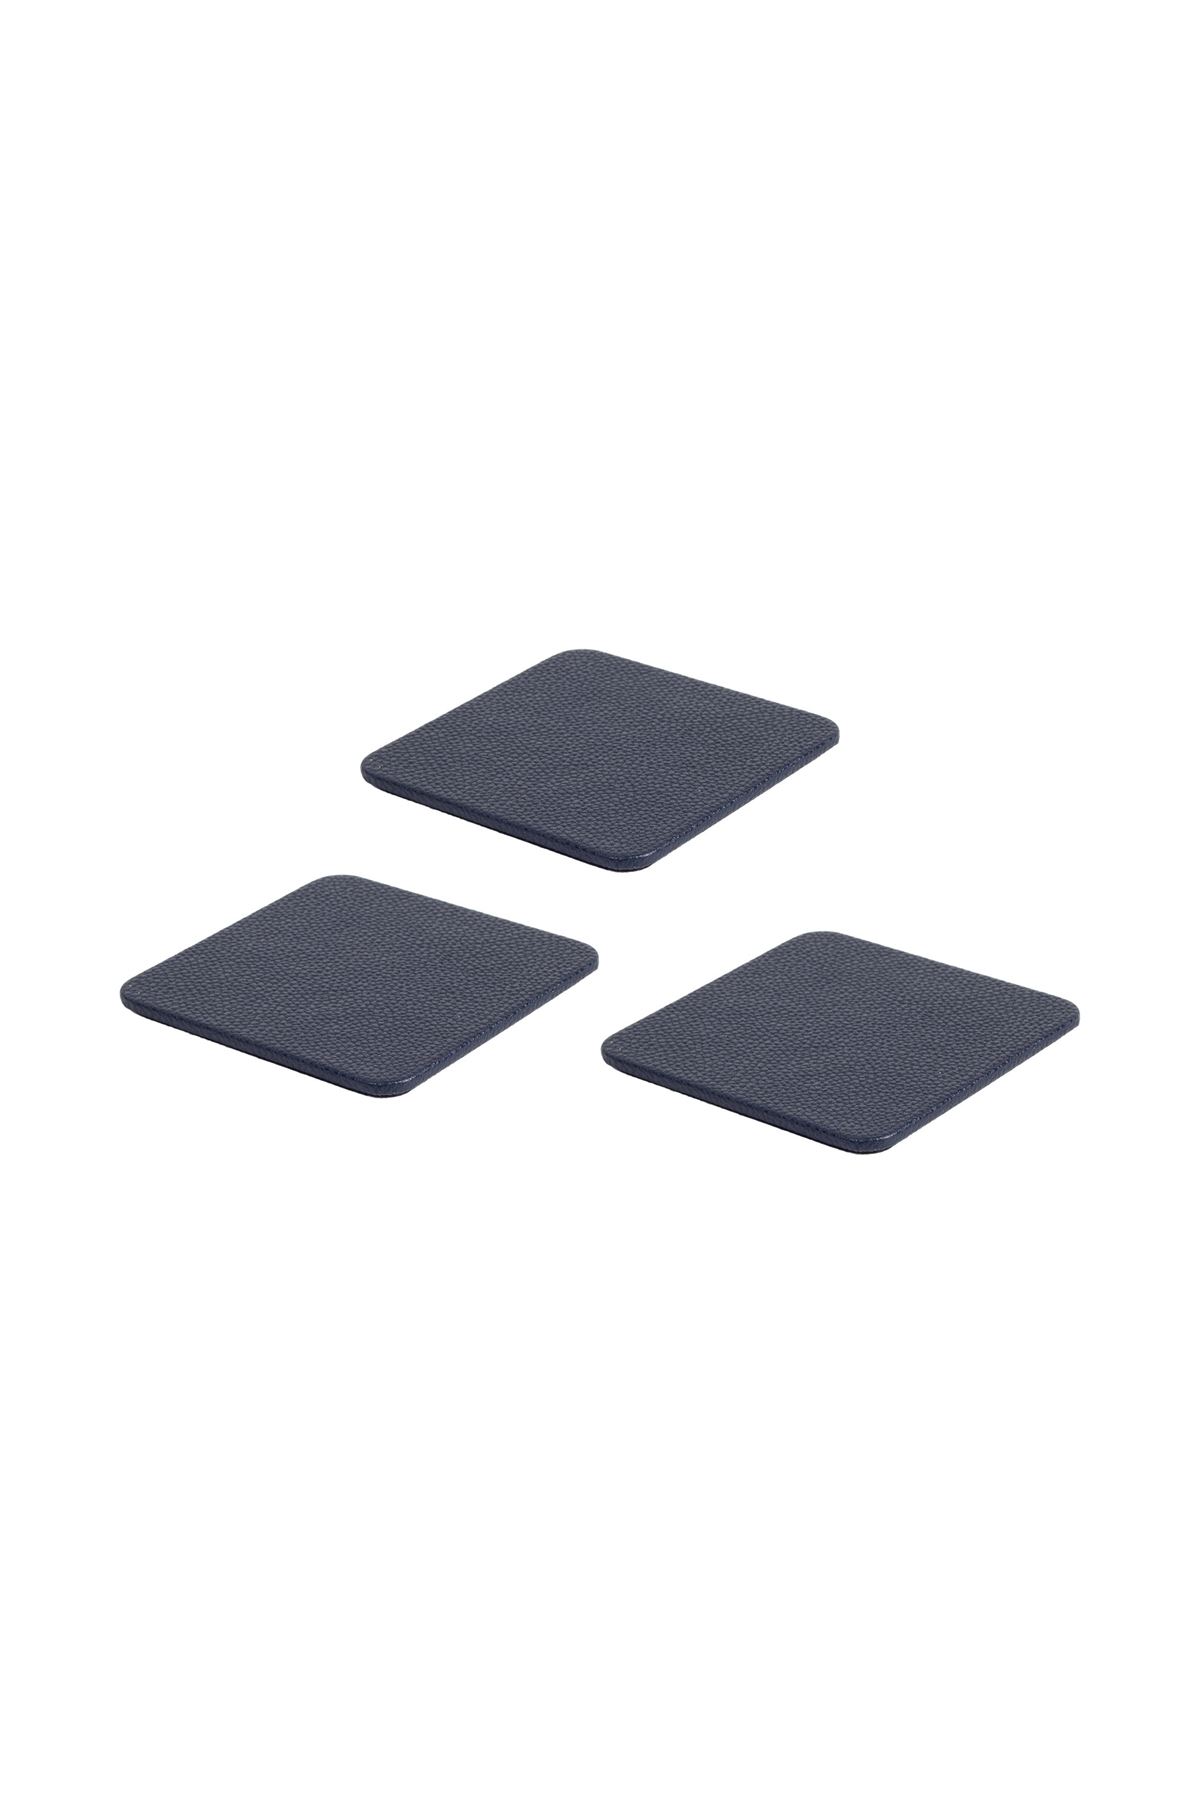 Navy Blue Leather Square Coaster 3 Piece